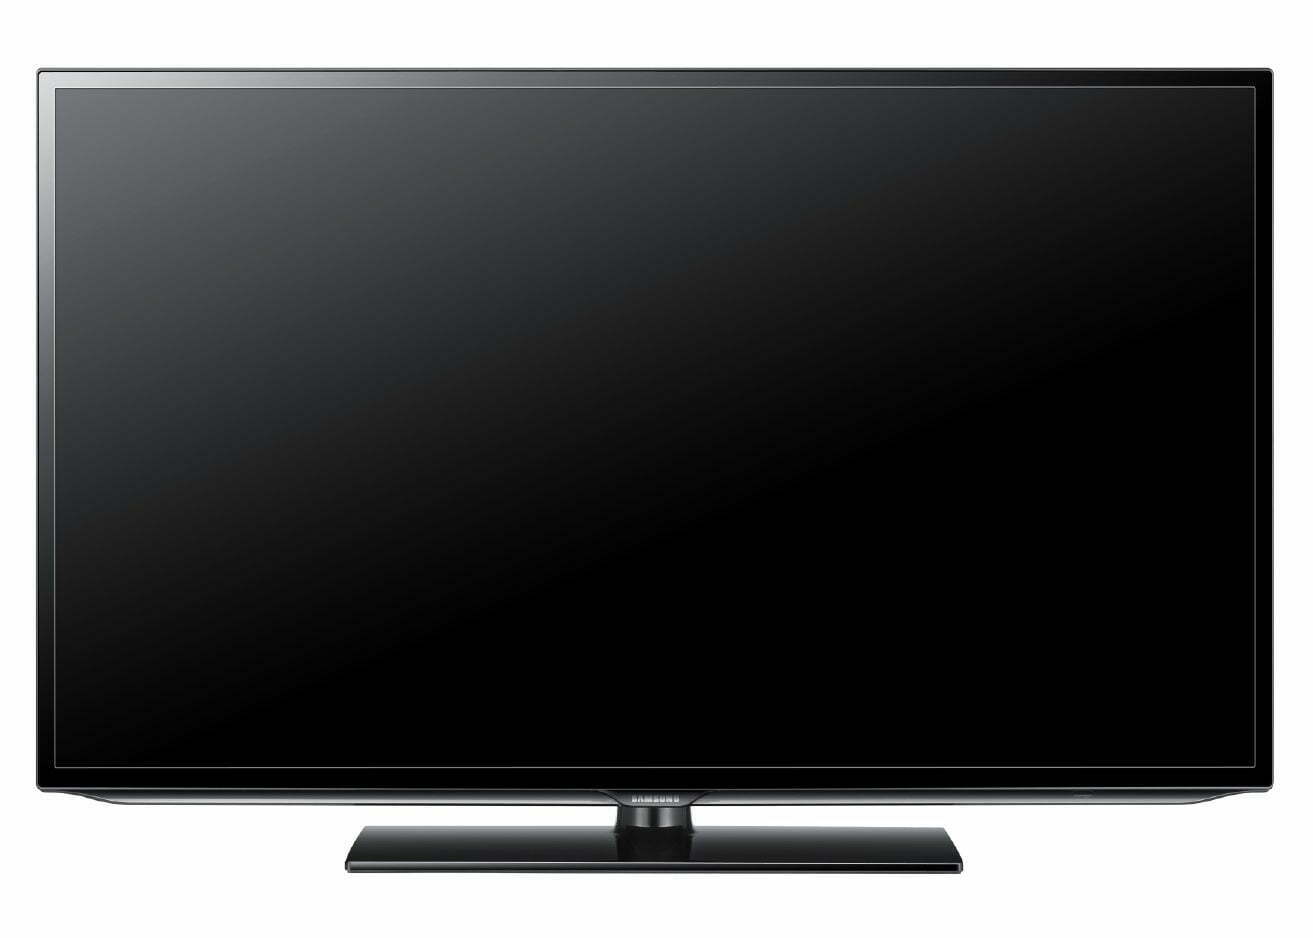 Samsung UN32EH5000 32-inch LED HDTV Review